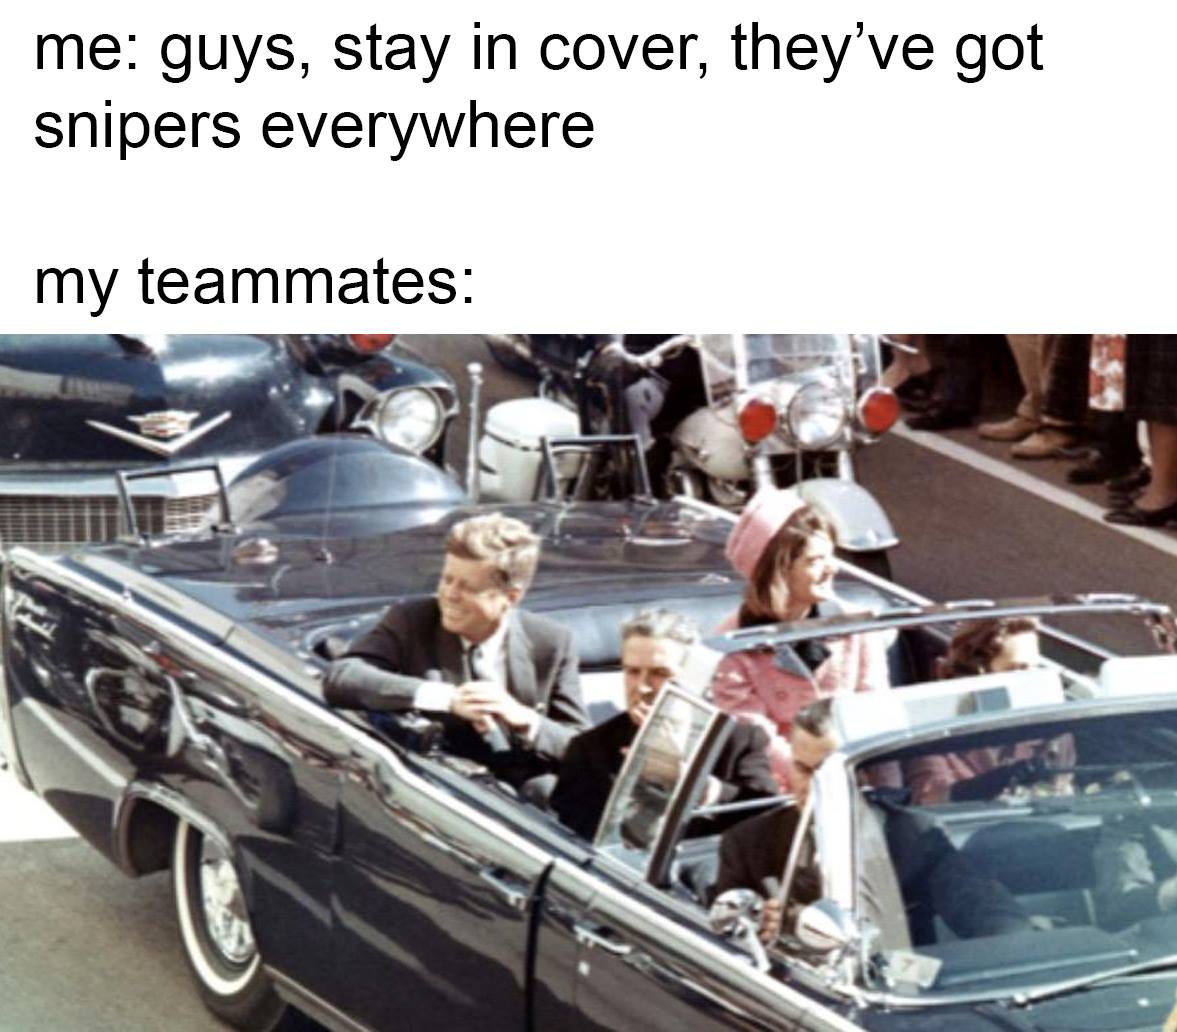 Dank, Kennedy, JFK, Oswald, Jack Ruby Dank Memes Dank, Kennedy, JFK, Oswald, Jack Ruby text: me: guys, stay in cover, they've got snipers everywhere my teammates: 